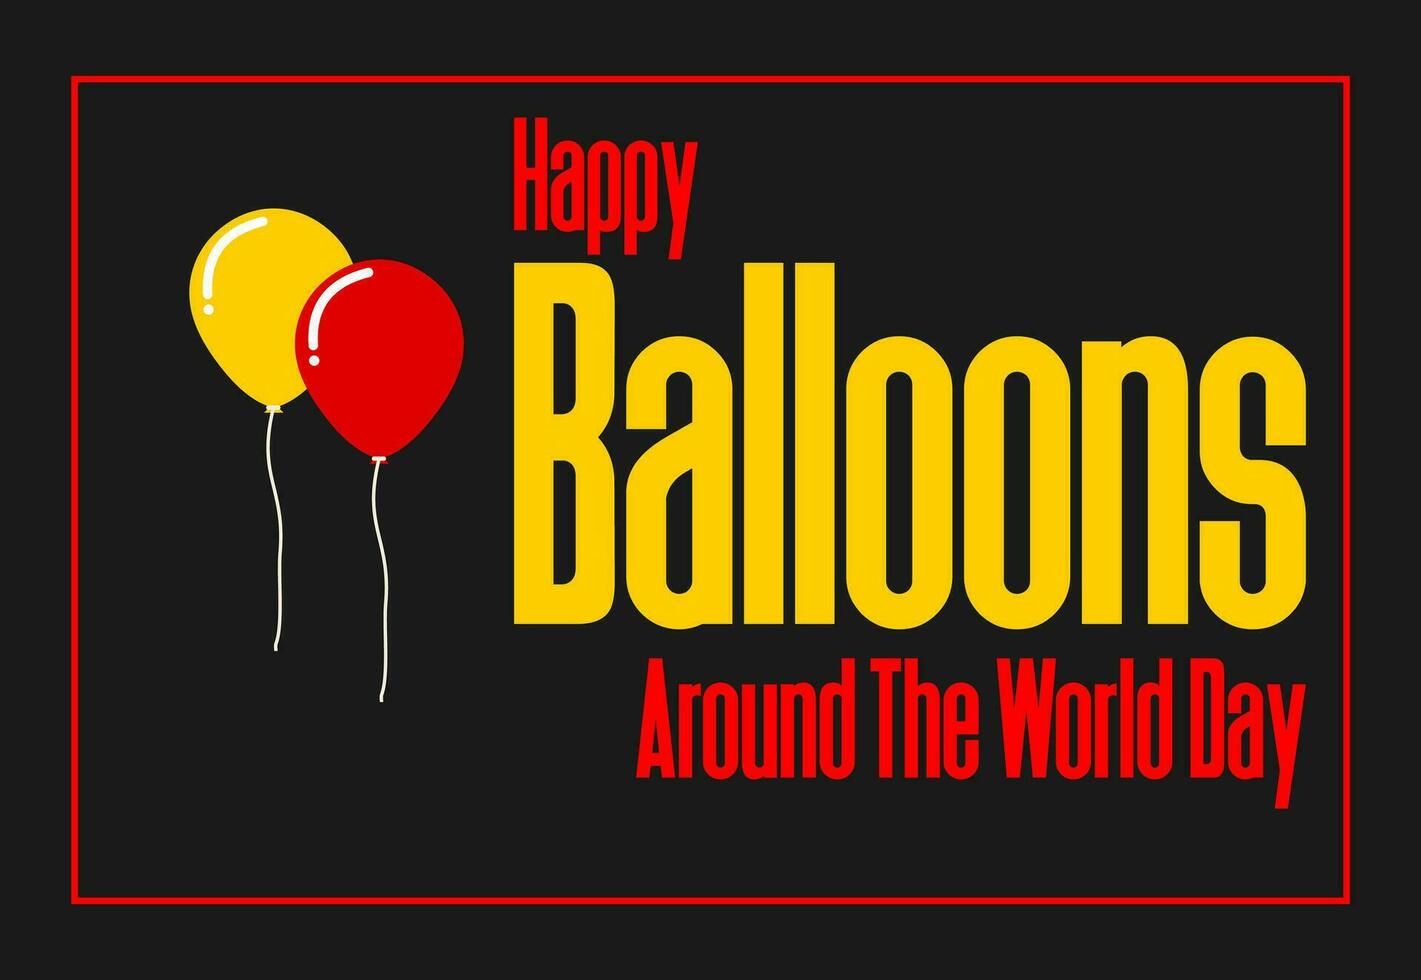 balloons around the world day vector